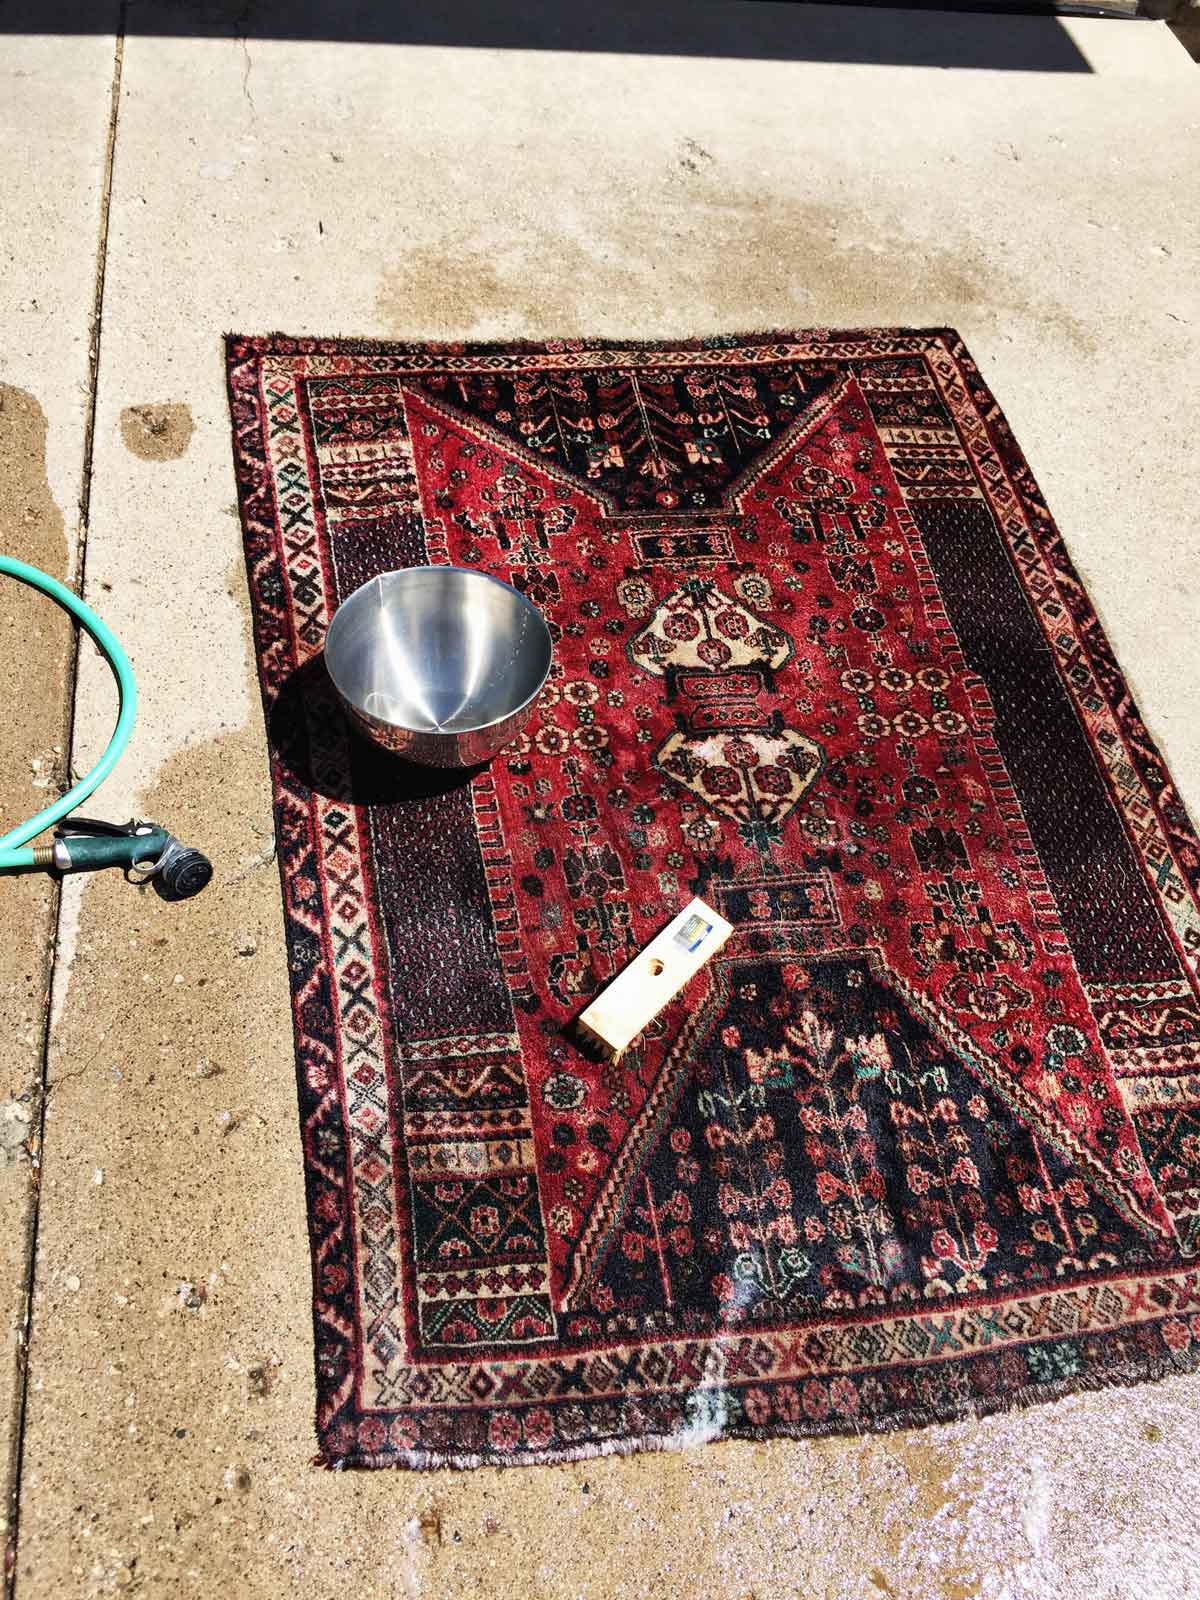 Rachel Schultz: HOW TO WASH A THRIFTED RUG (IT IS EASY)